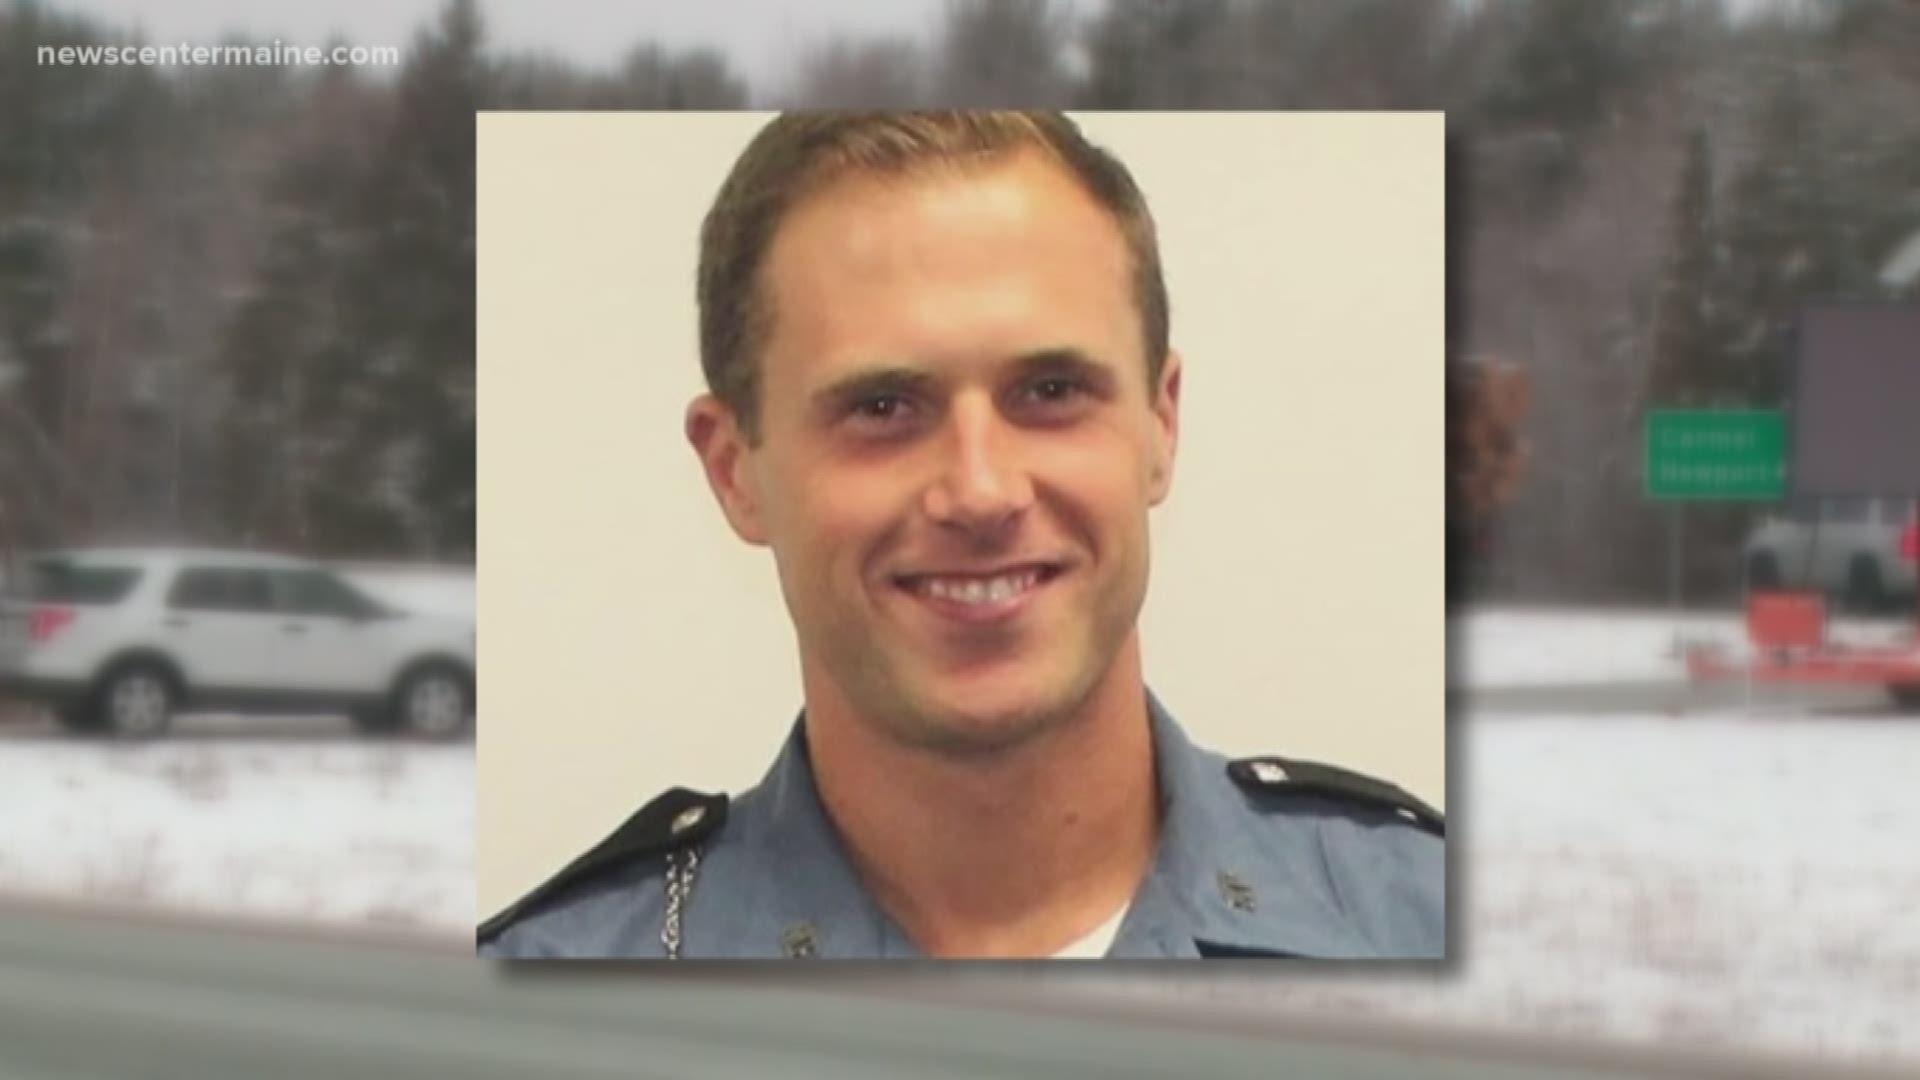 Det. Benjamin Campbell was killed in a bizarre accident on I-95 in early April.